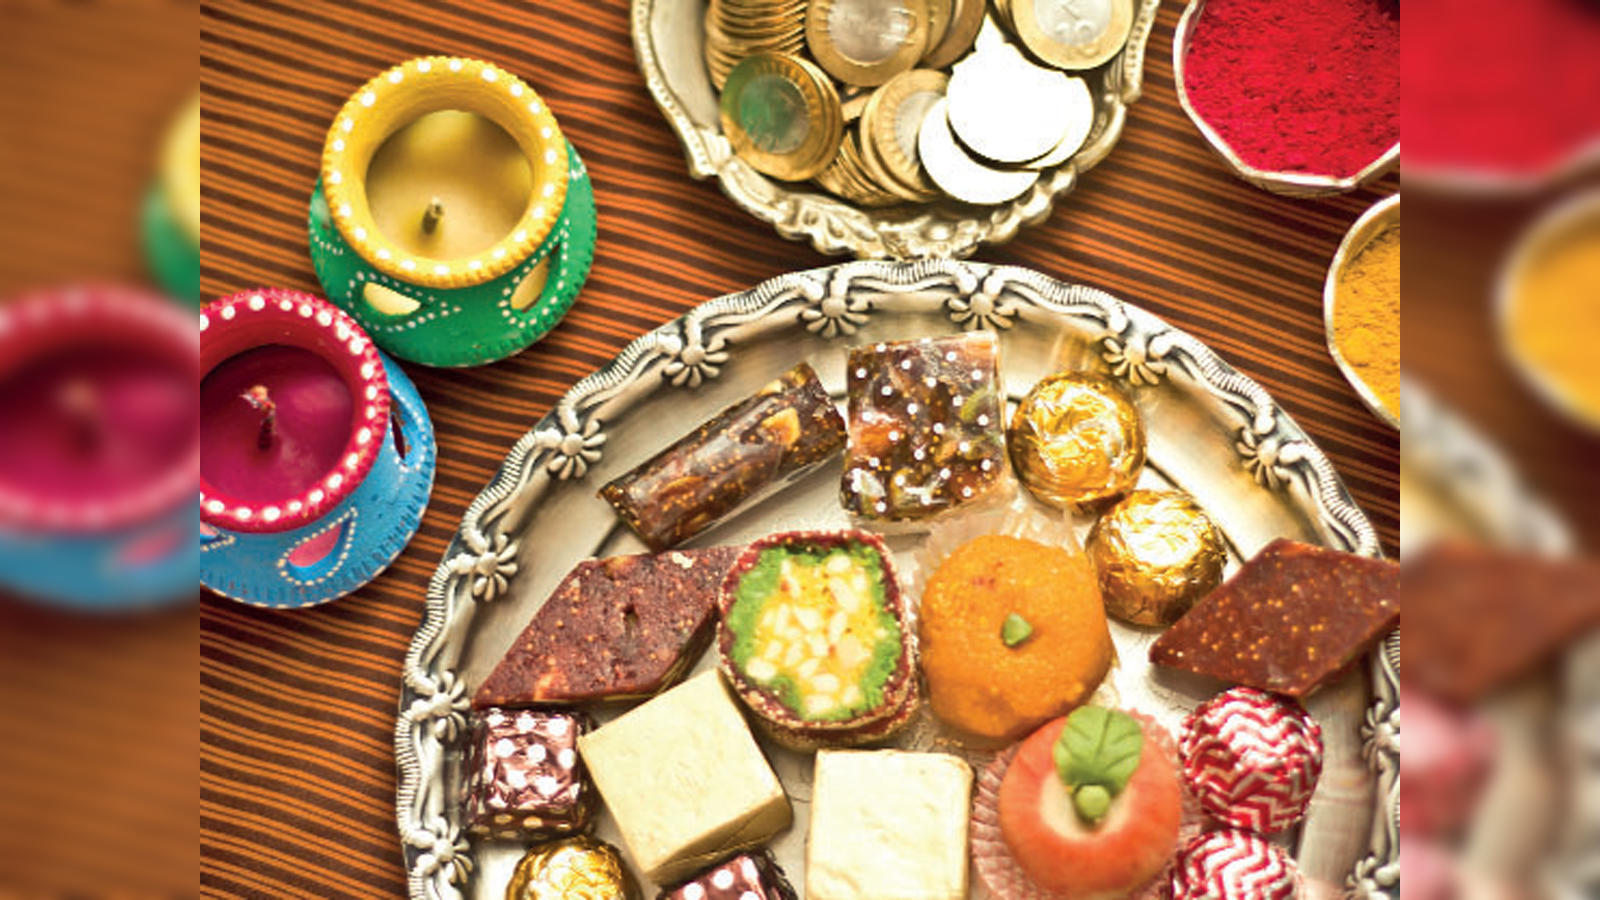 Diwali 2019: 10 traditional Diwali foods from across Indian states